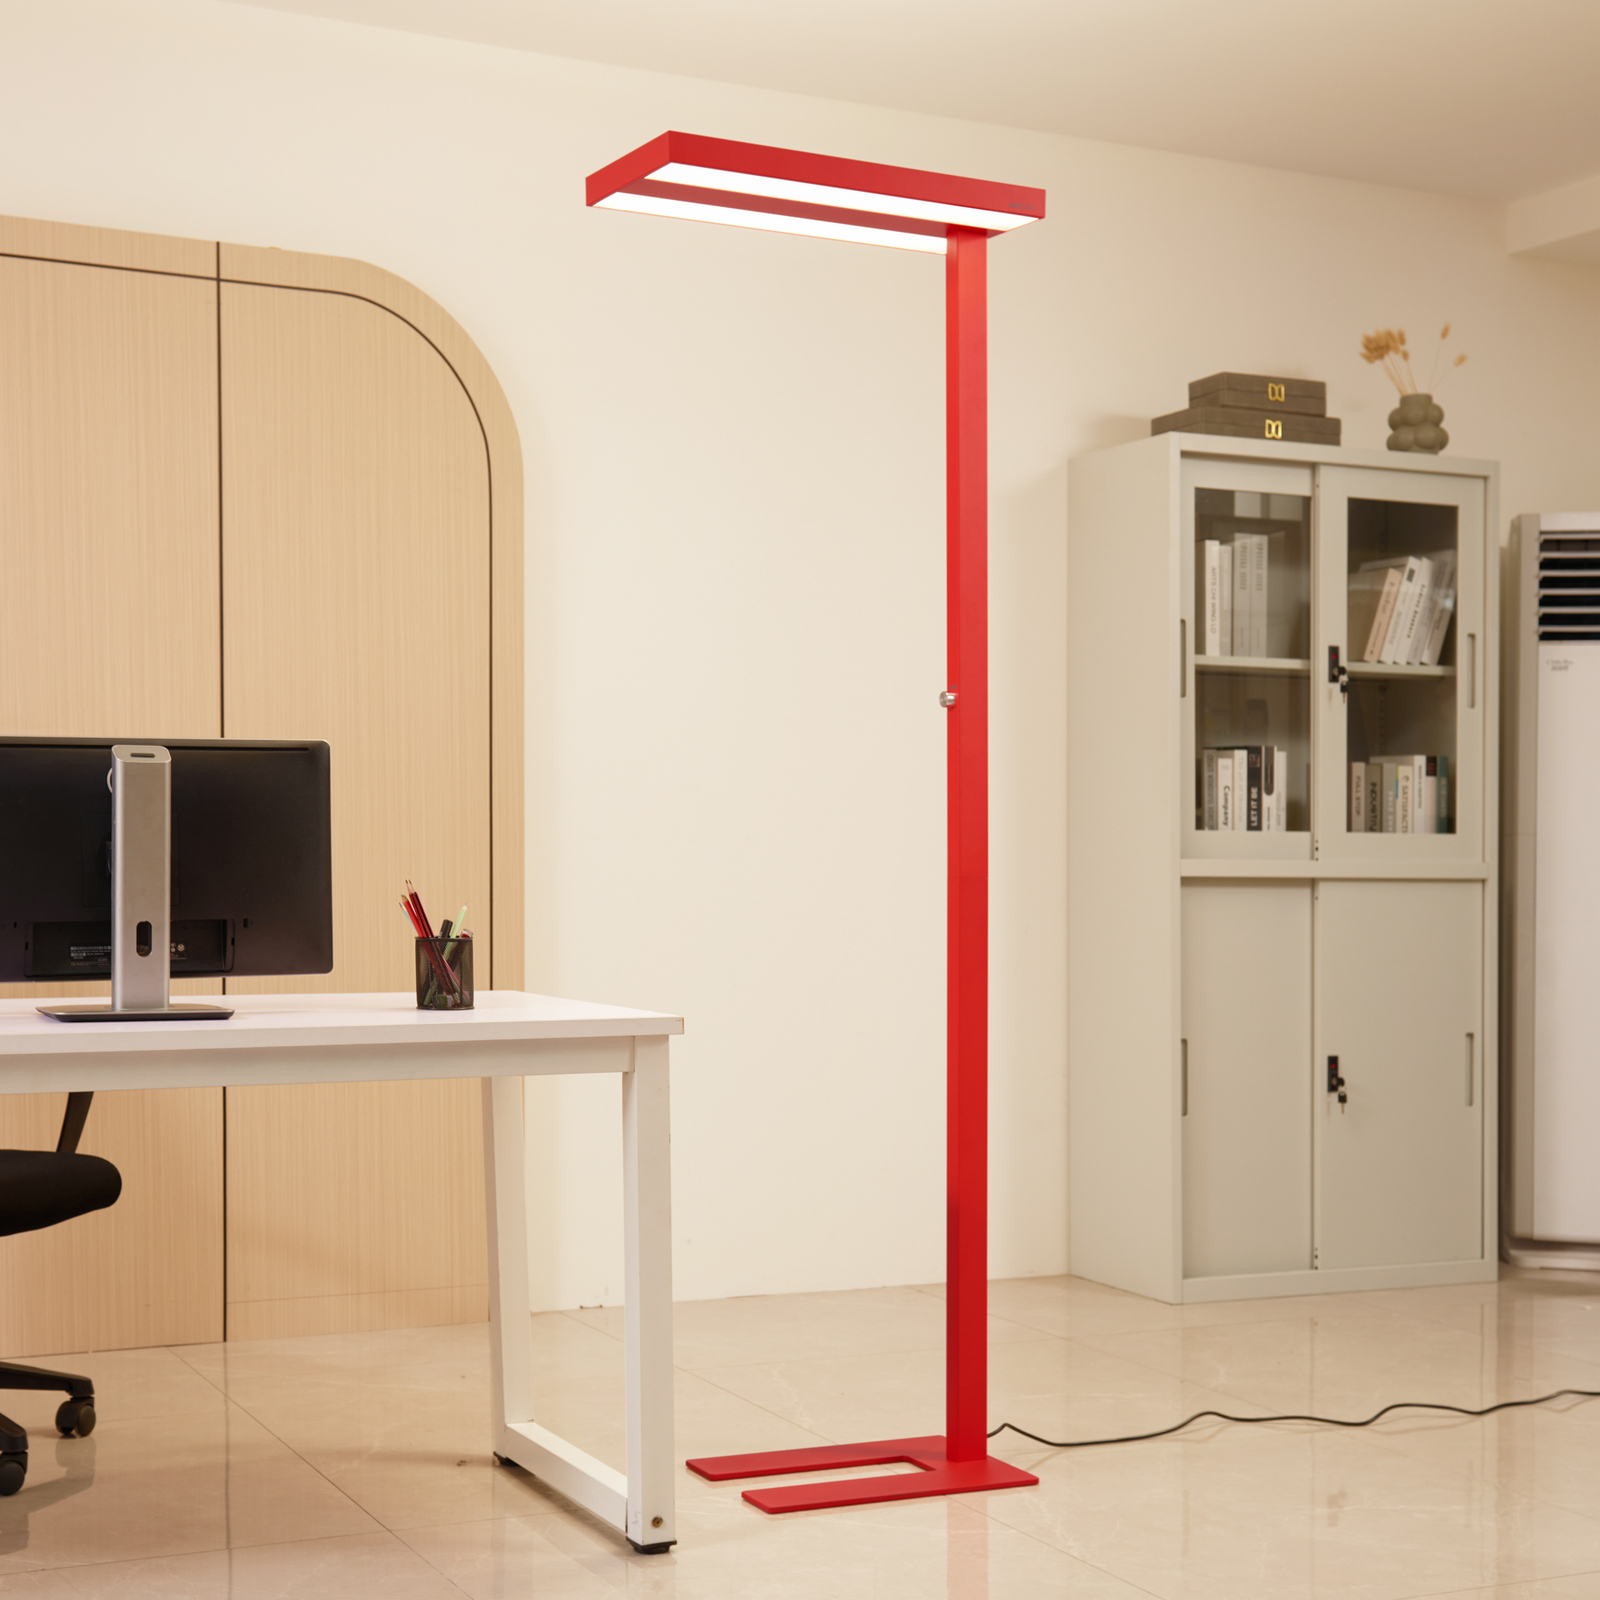 Arcchio LED floor lamp Logan Basic, red, 6,000 lm, dimmable